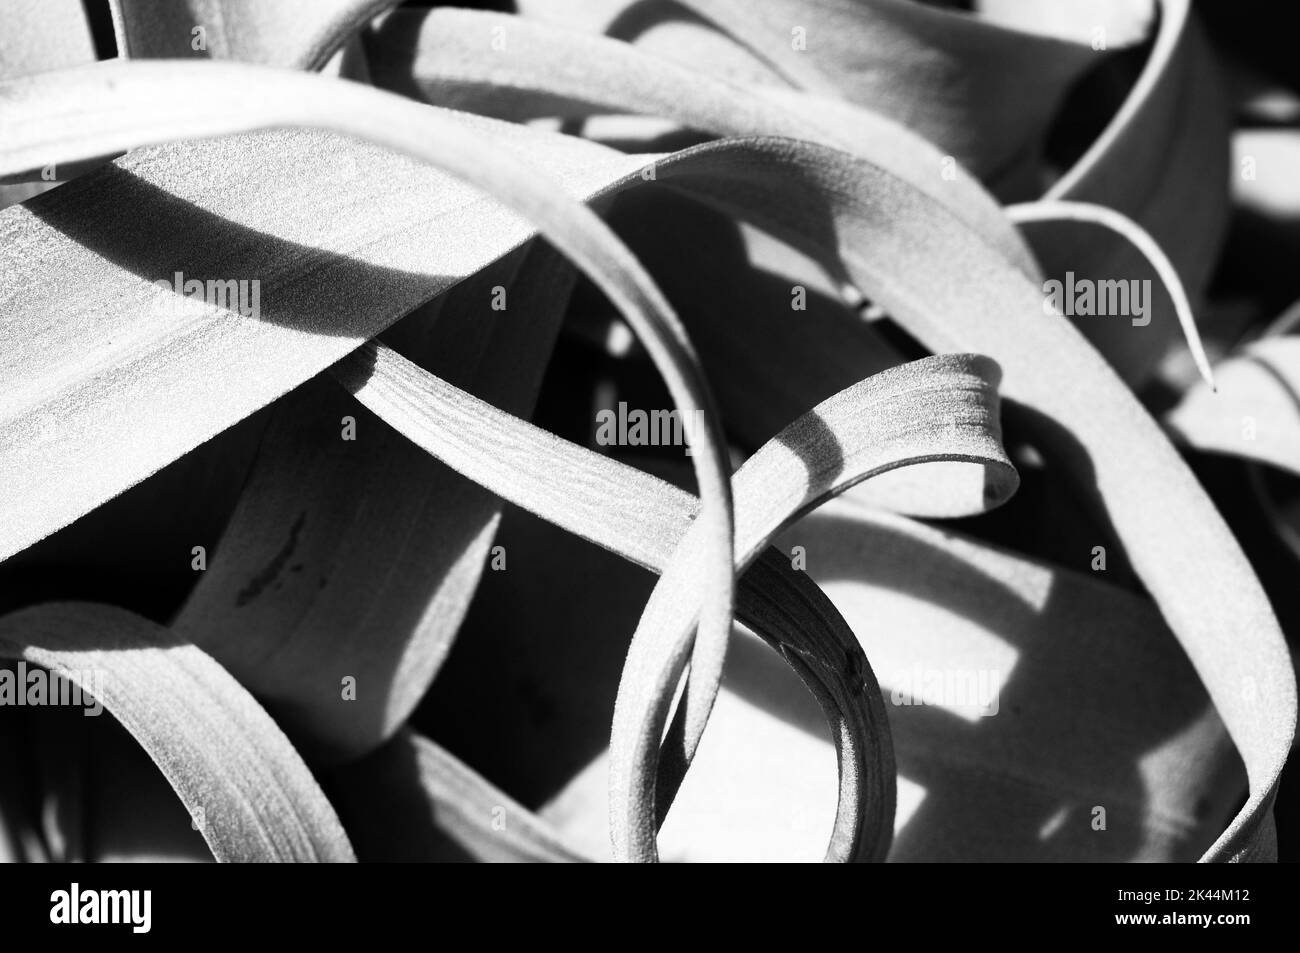 Leaves black and white stock photo Stock Photo